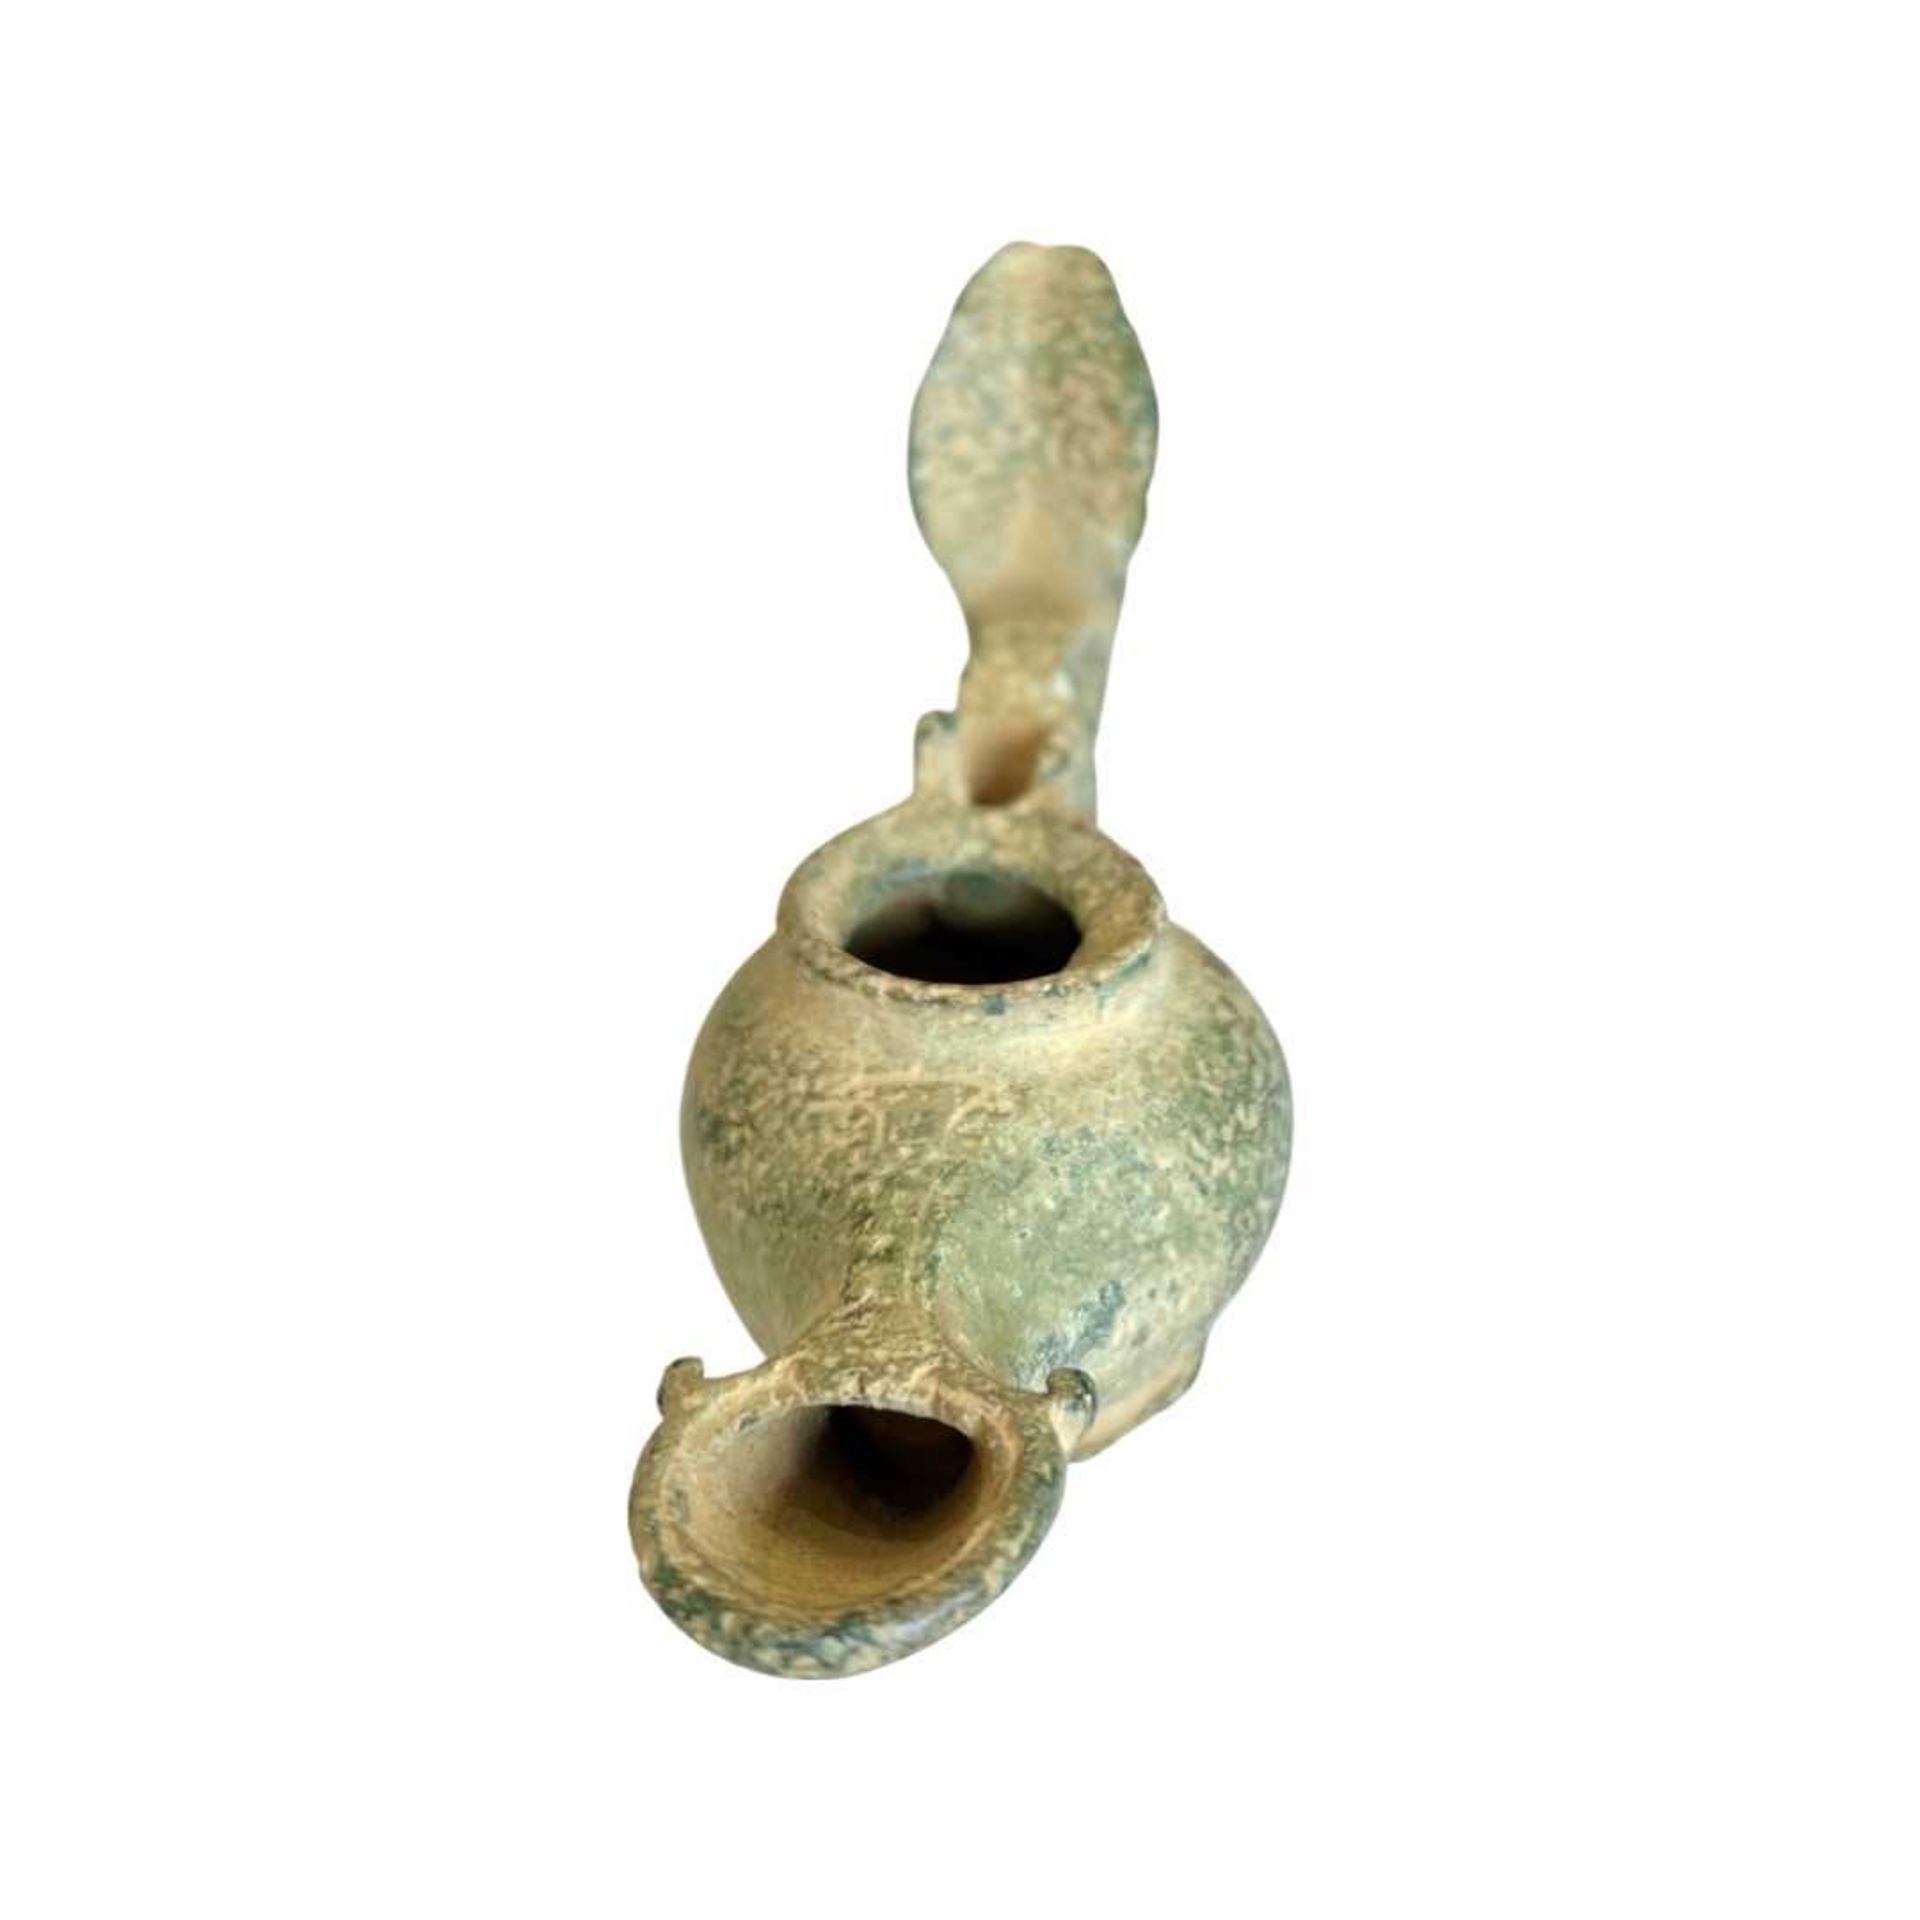 A ROMAN BRONZE OIL LAMP, 2ND - 3RD CENTURY AD. - Image 5 of 5